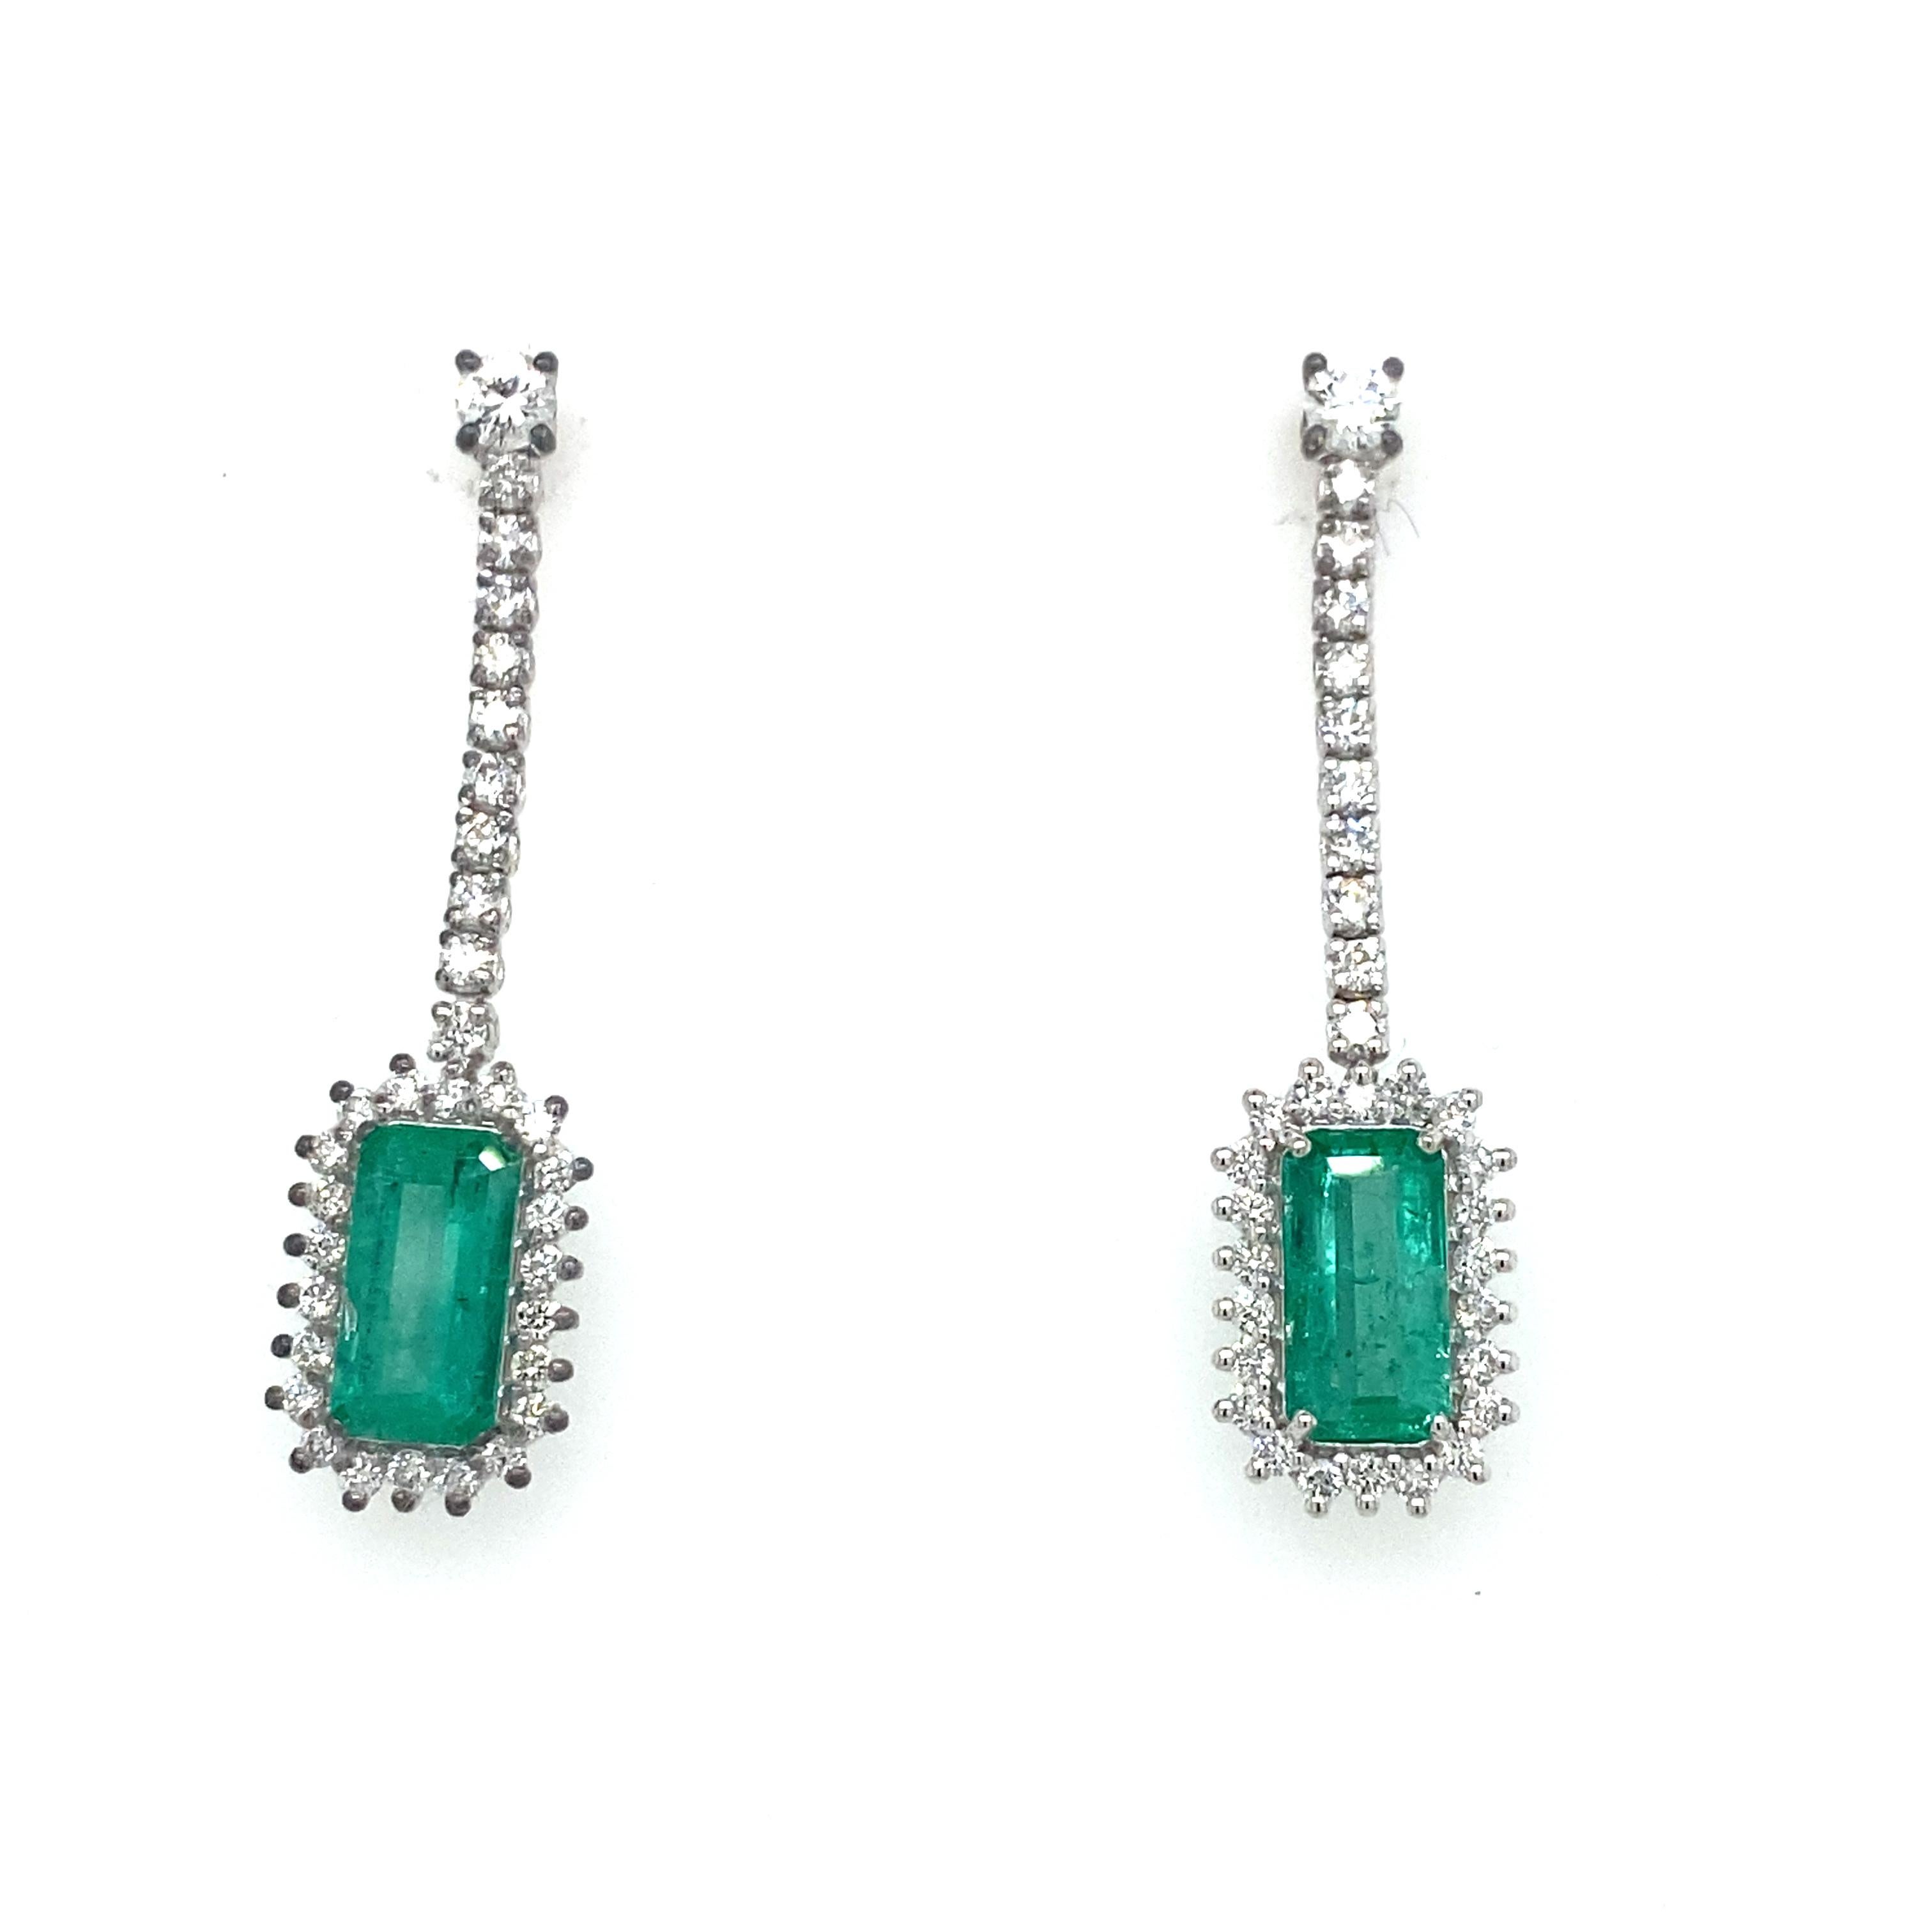 Elegant pair of earrings handmade in 18 kt gold. The two splendid natural emeralds with a vivid green color (emerald cut - total 1.60 ct) surrounded by 48 round brilliant-cut natural diamonds (VVS - G Color - 1.20 ct) stand out, the two diamonds at